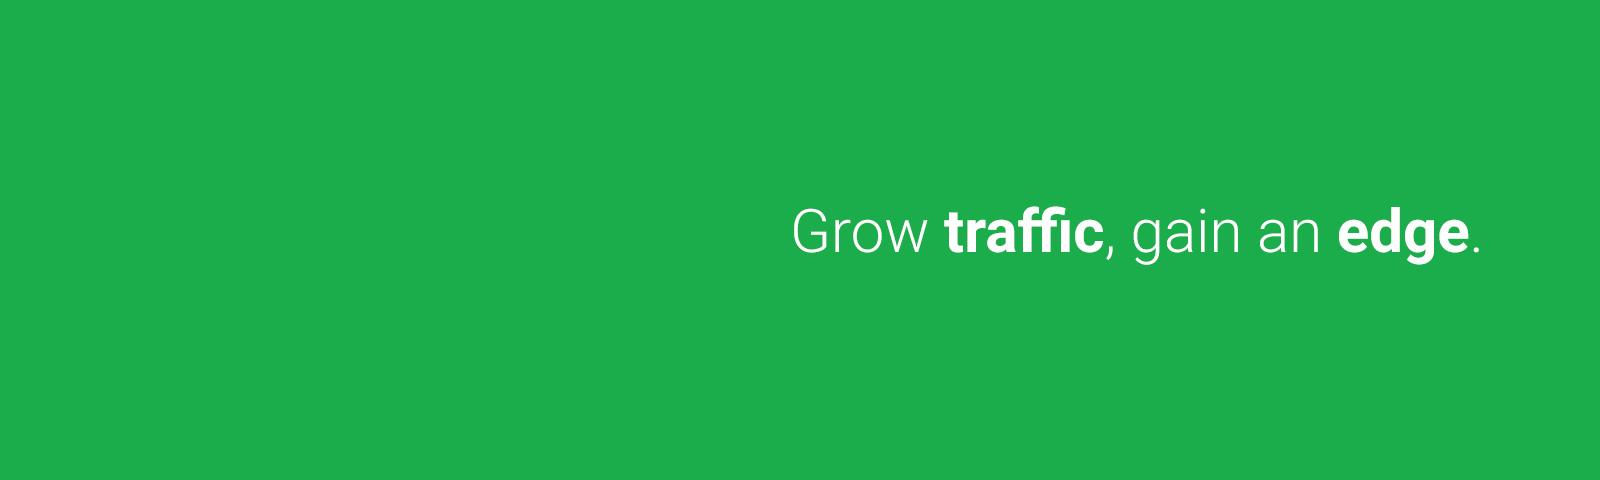 Review Link-able: Grow traffic, gain an edge. - Appvizer